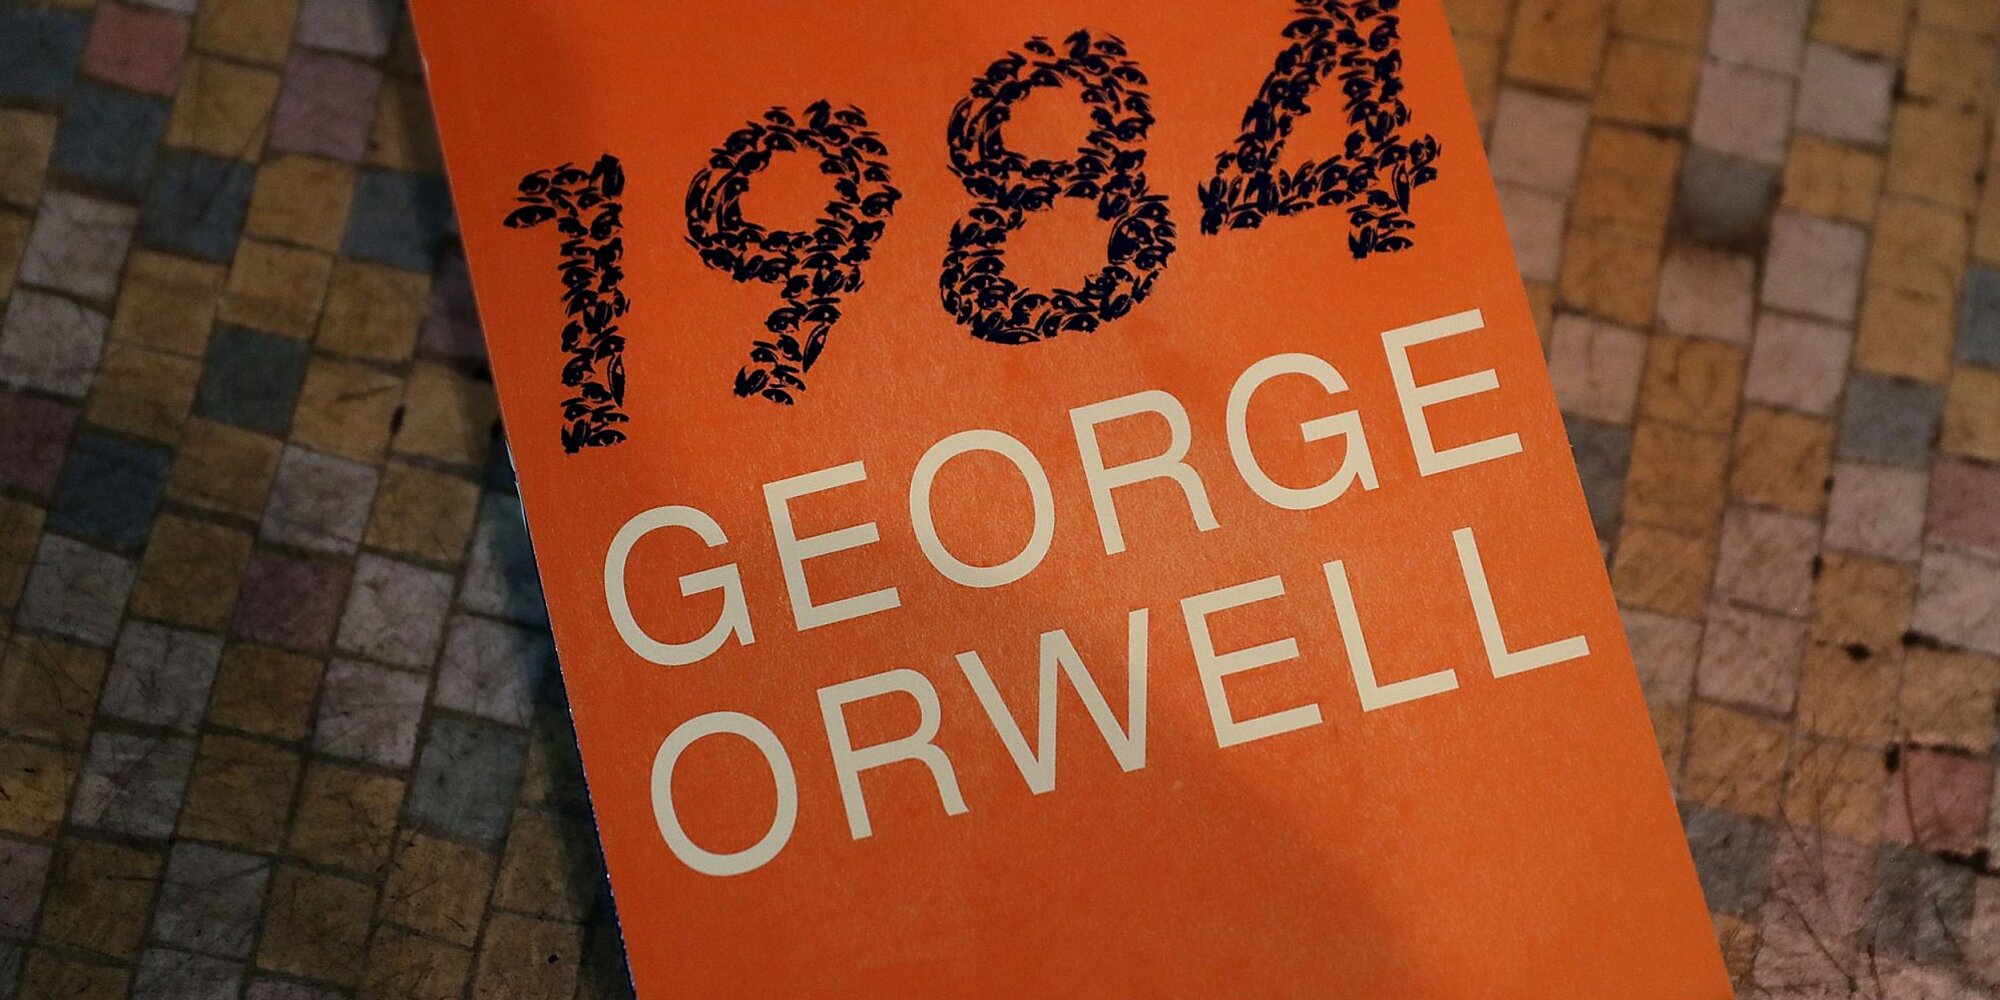 “I wonder what a lemon was,” says Julia, the young rebel heroine of George Orwell’s 1984, after hearing a rhyme about lemons and 